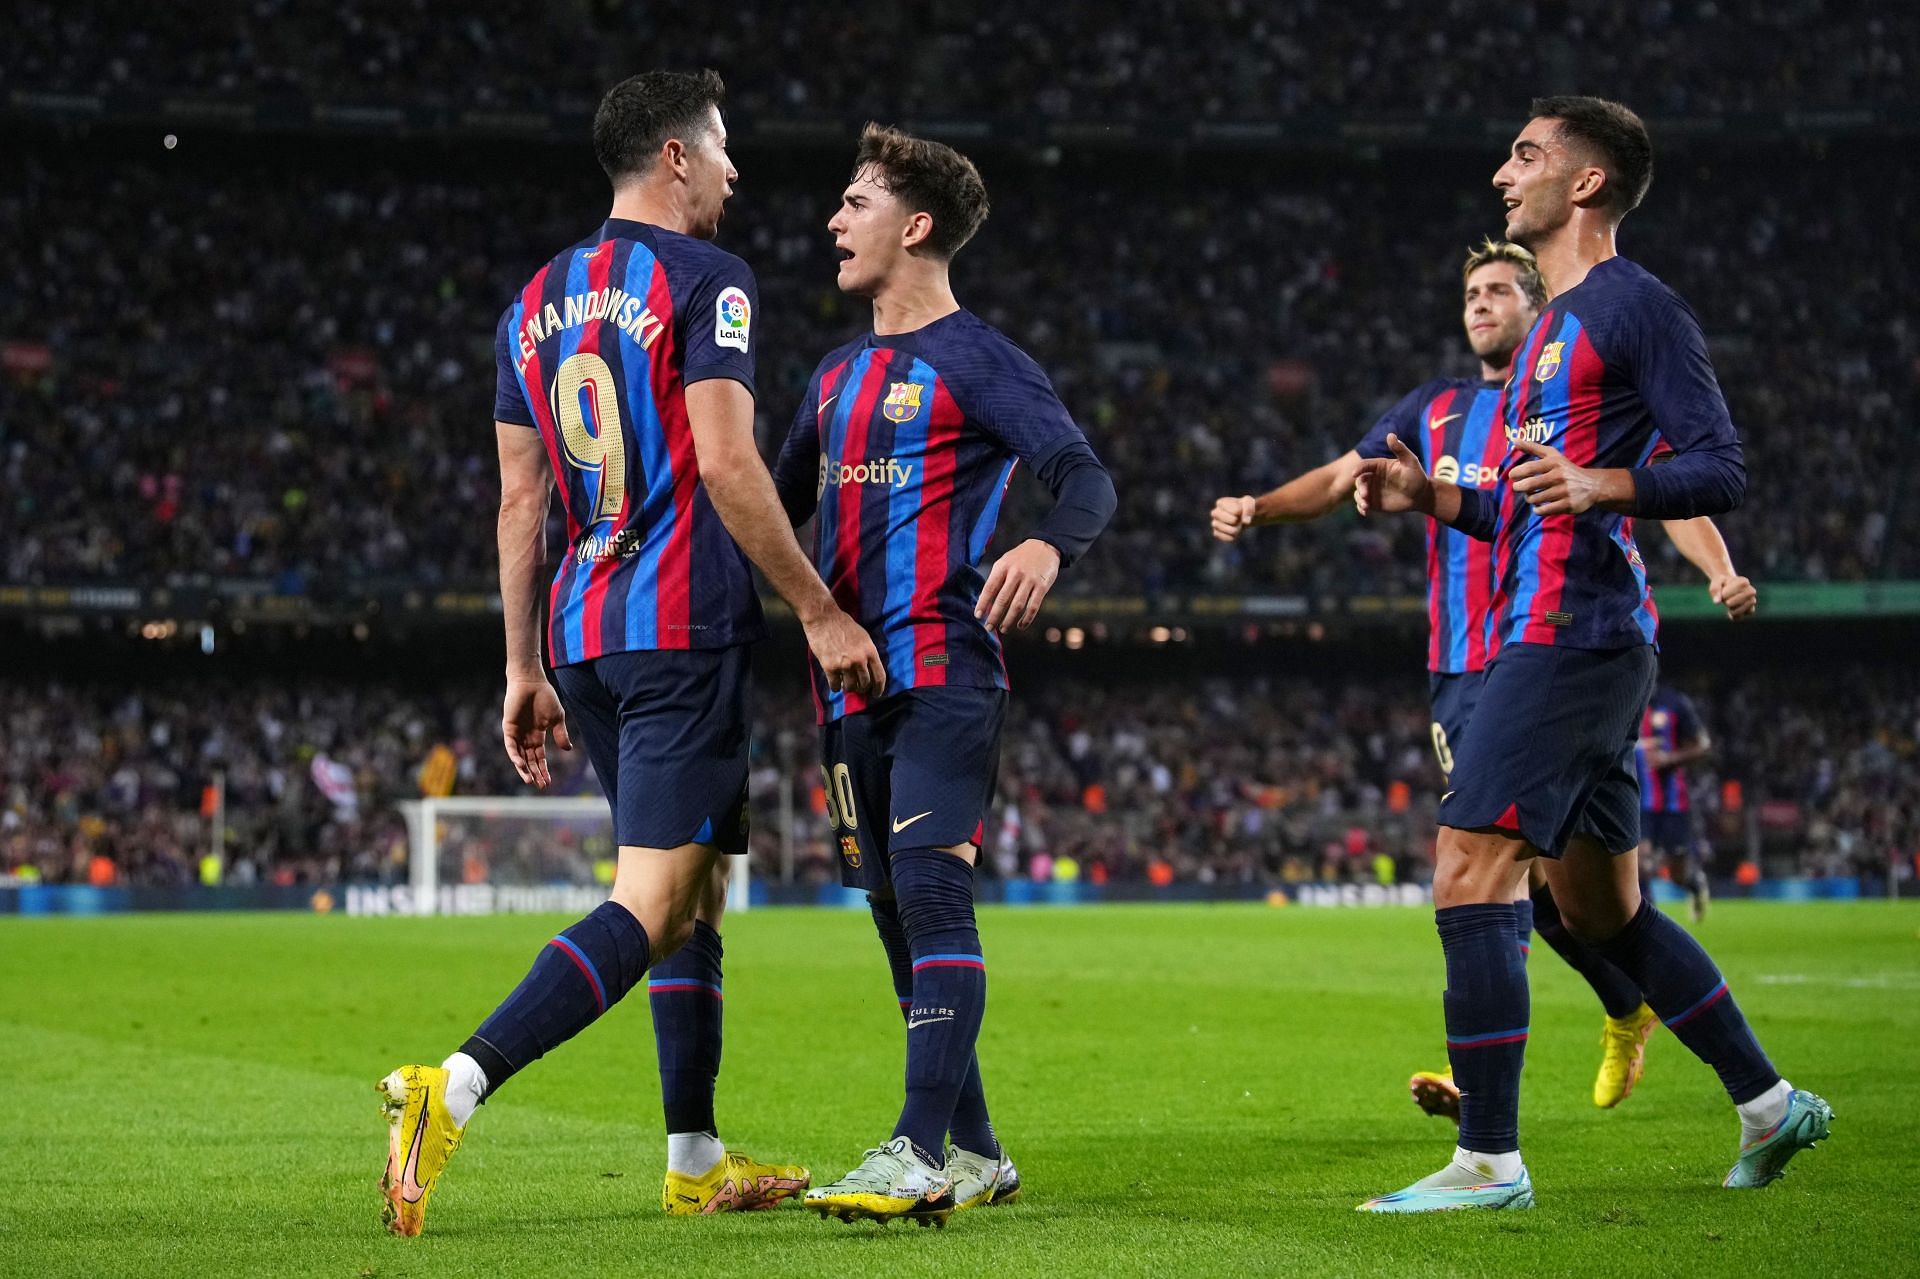 Barca romped to victory 